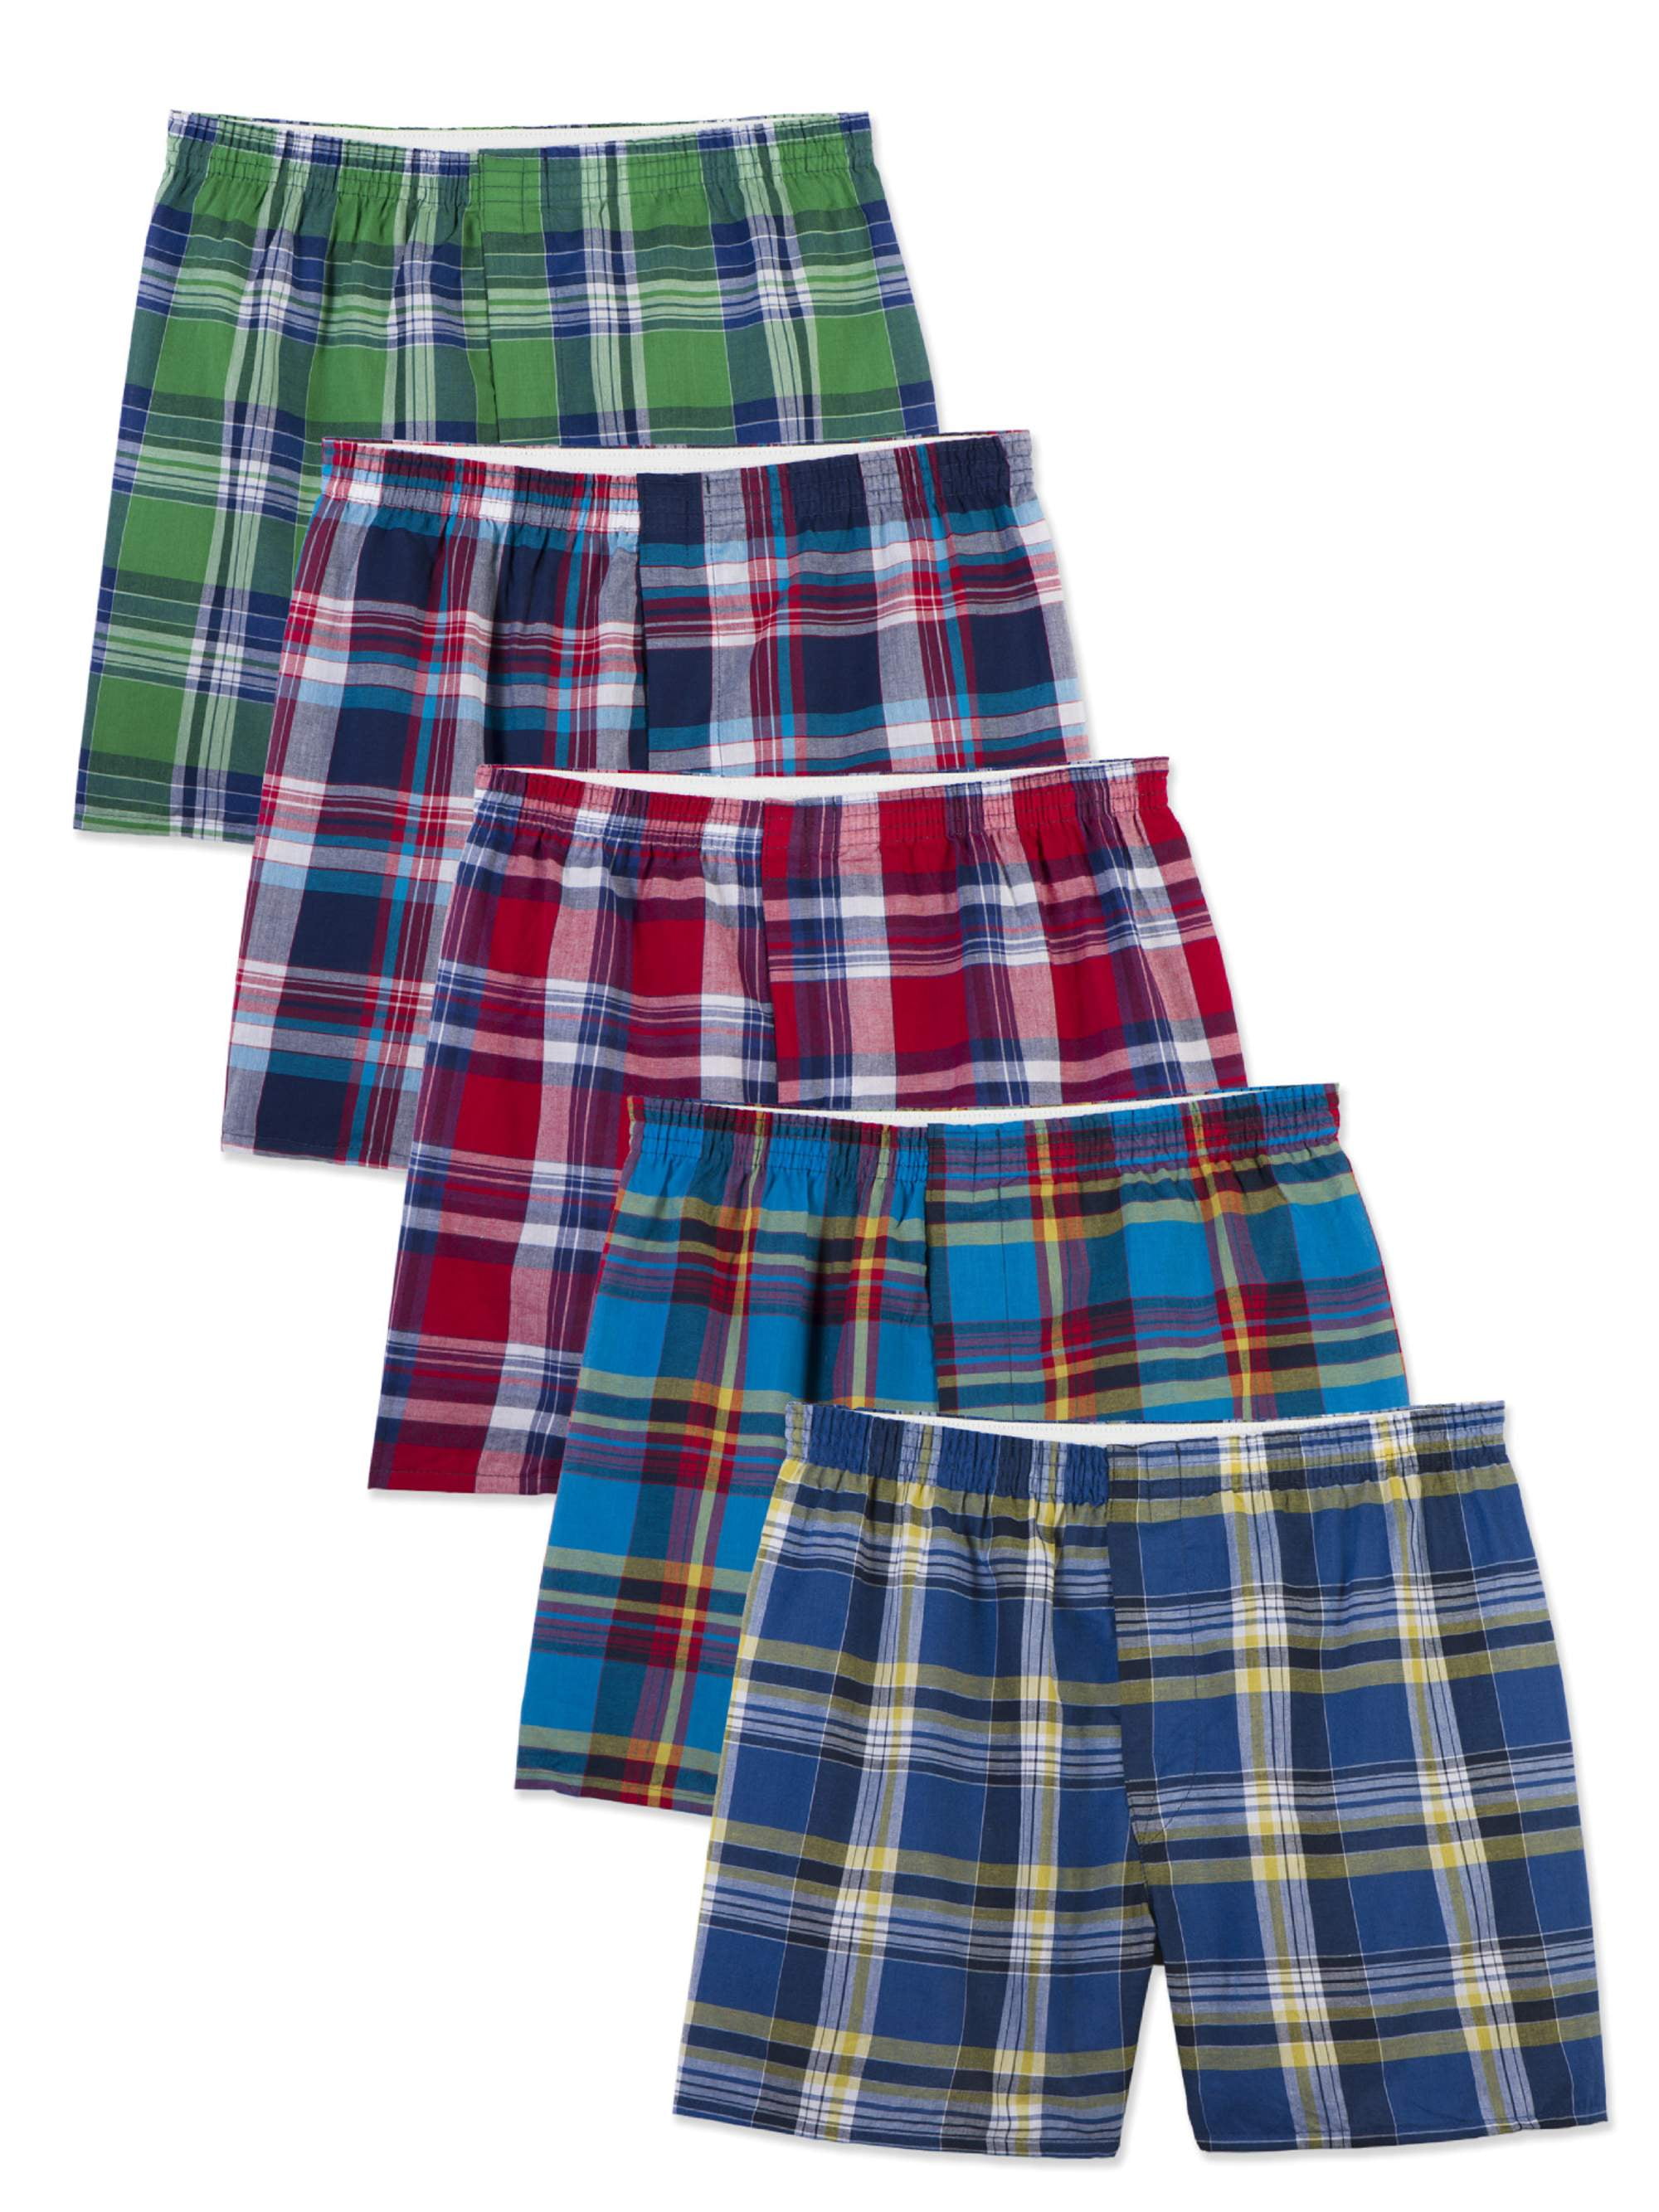 Fruit of the Loom Mens Big Man Boxers-Tartan Plaid Up to Size 5X 